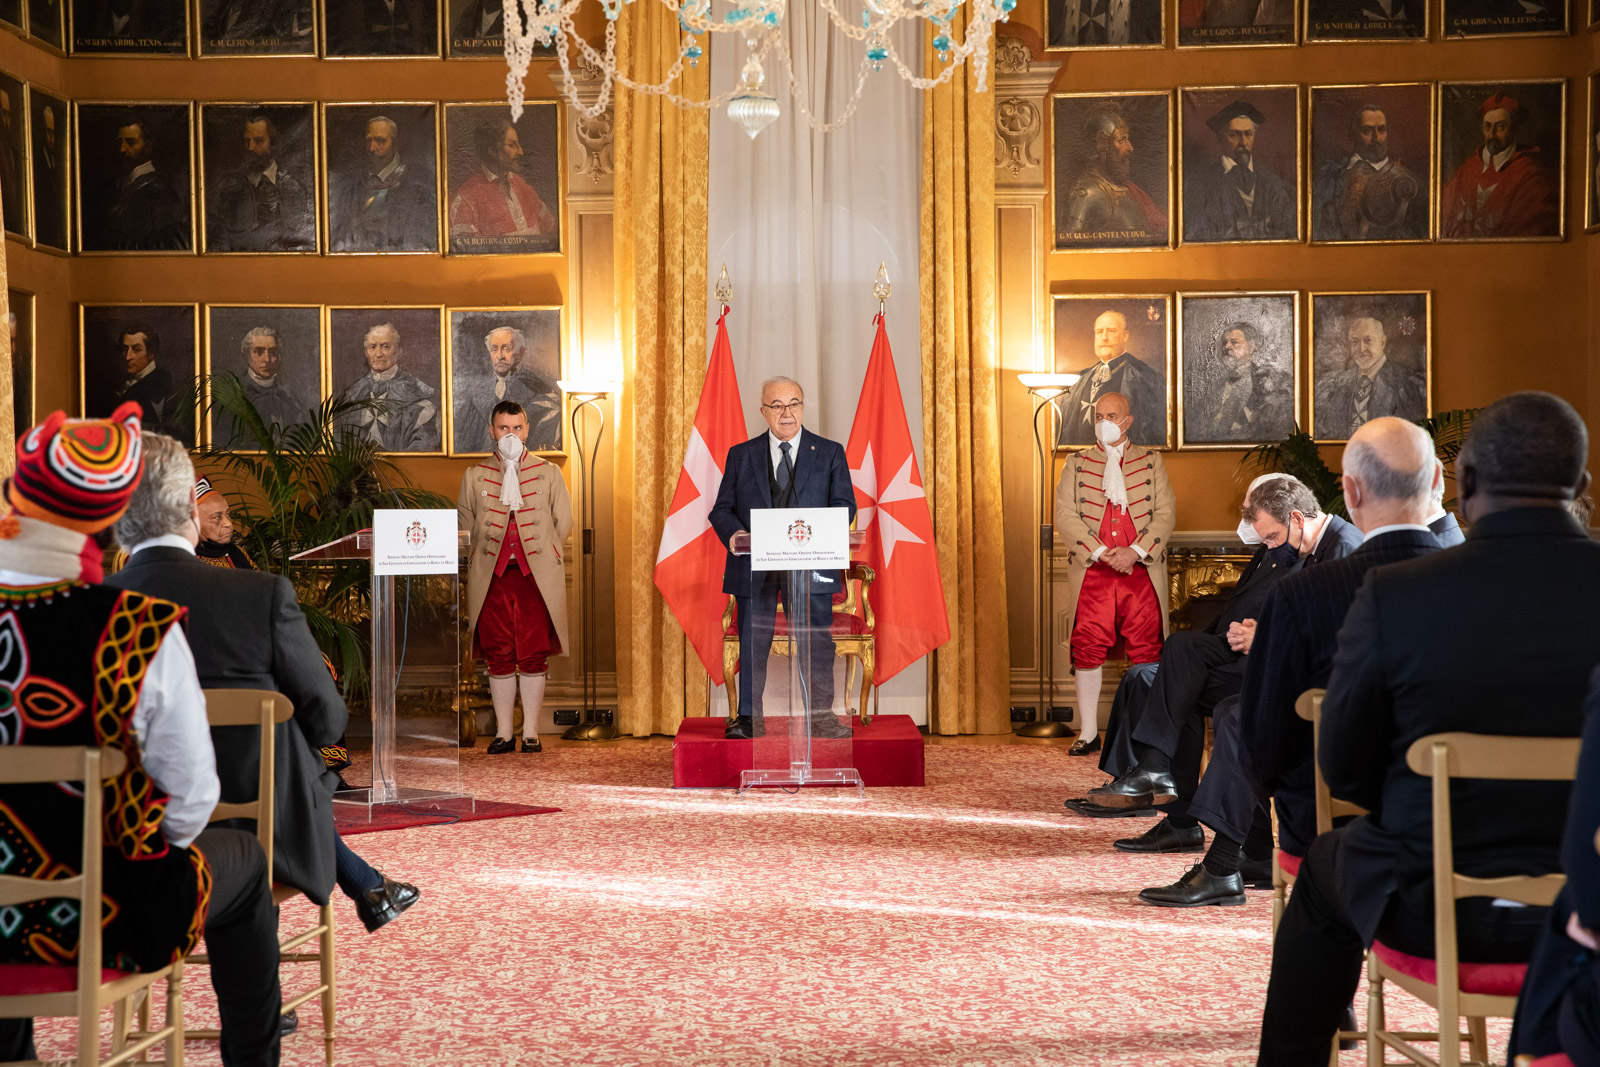 Speech by the Lieutenant of the Grand Master Fra’ Marco Luzzago to the Diplomatic Corps accredited to the Sovereign Order of Malta